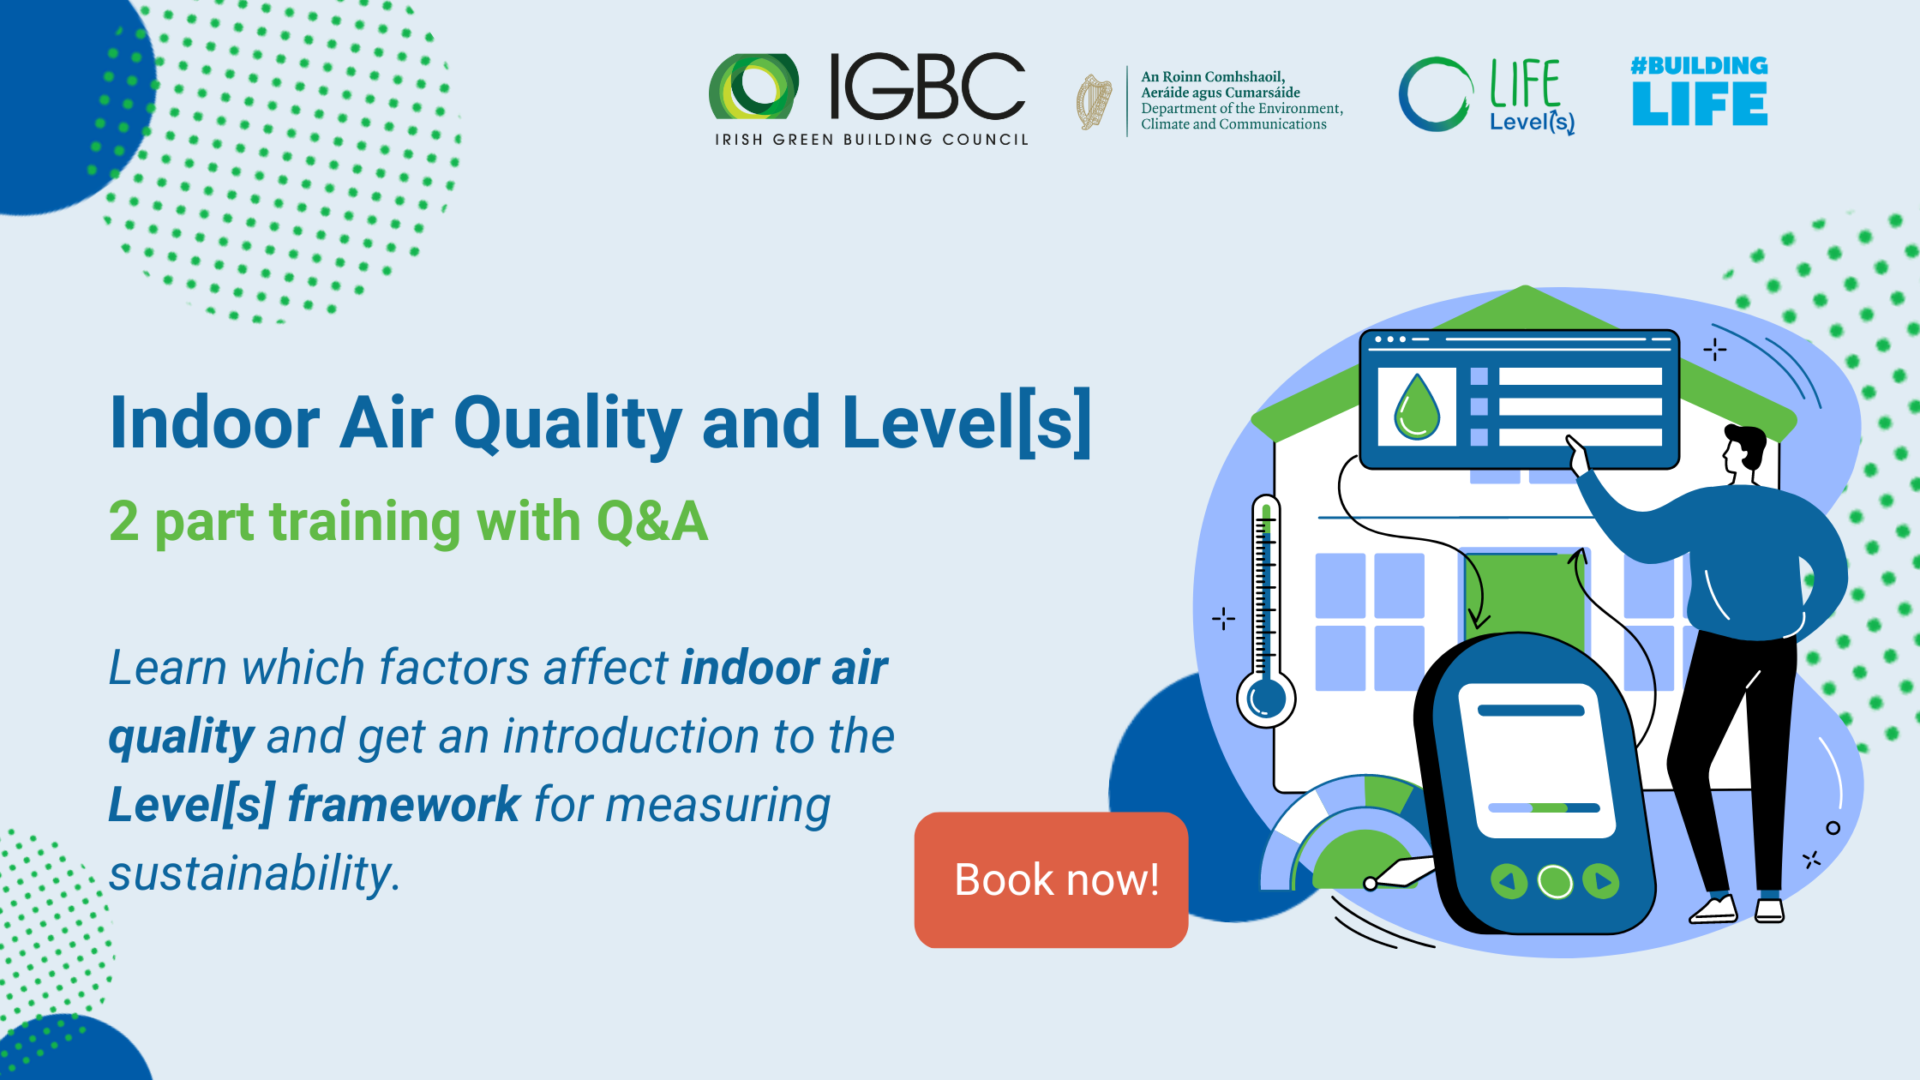 Indoor Air Quality and Level(s): Two-part training with Q&A